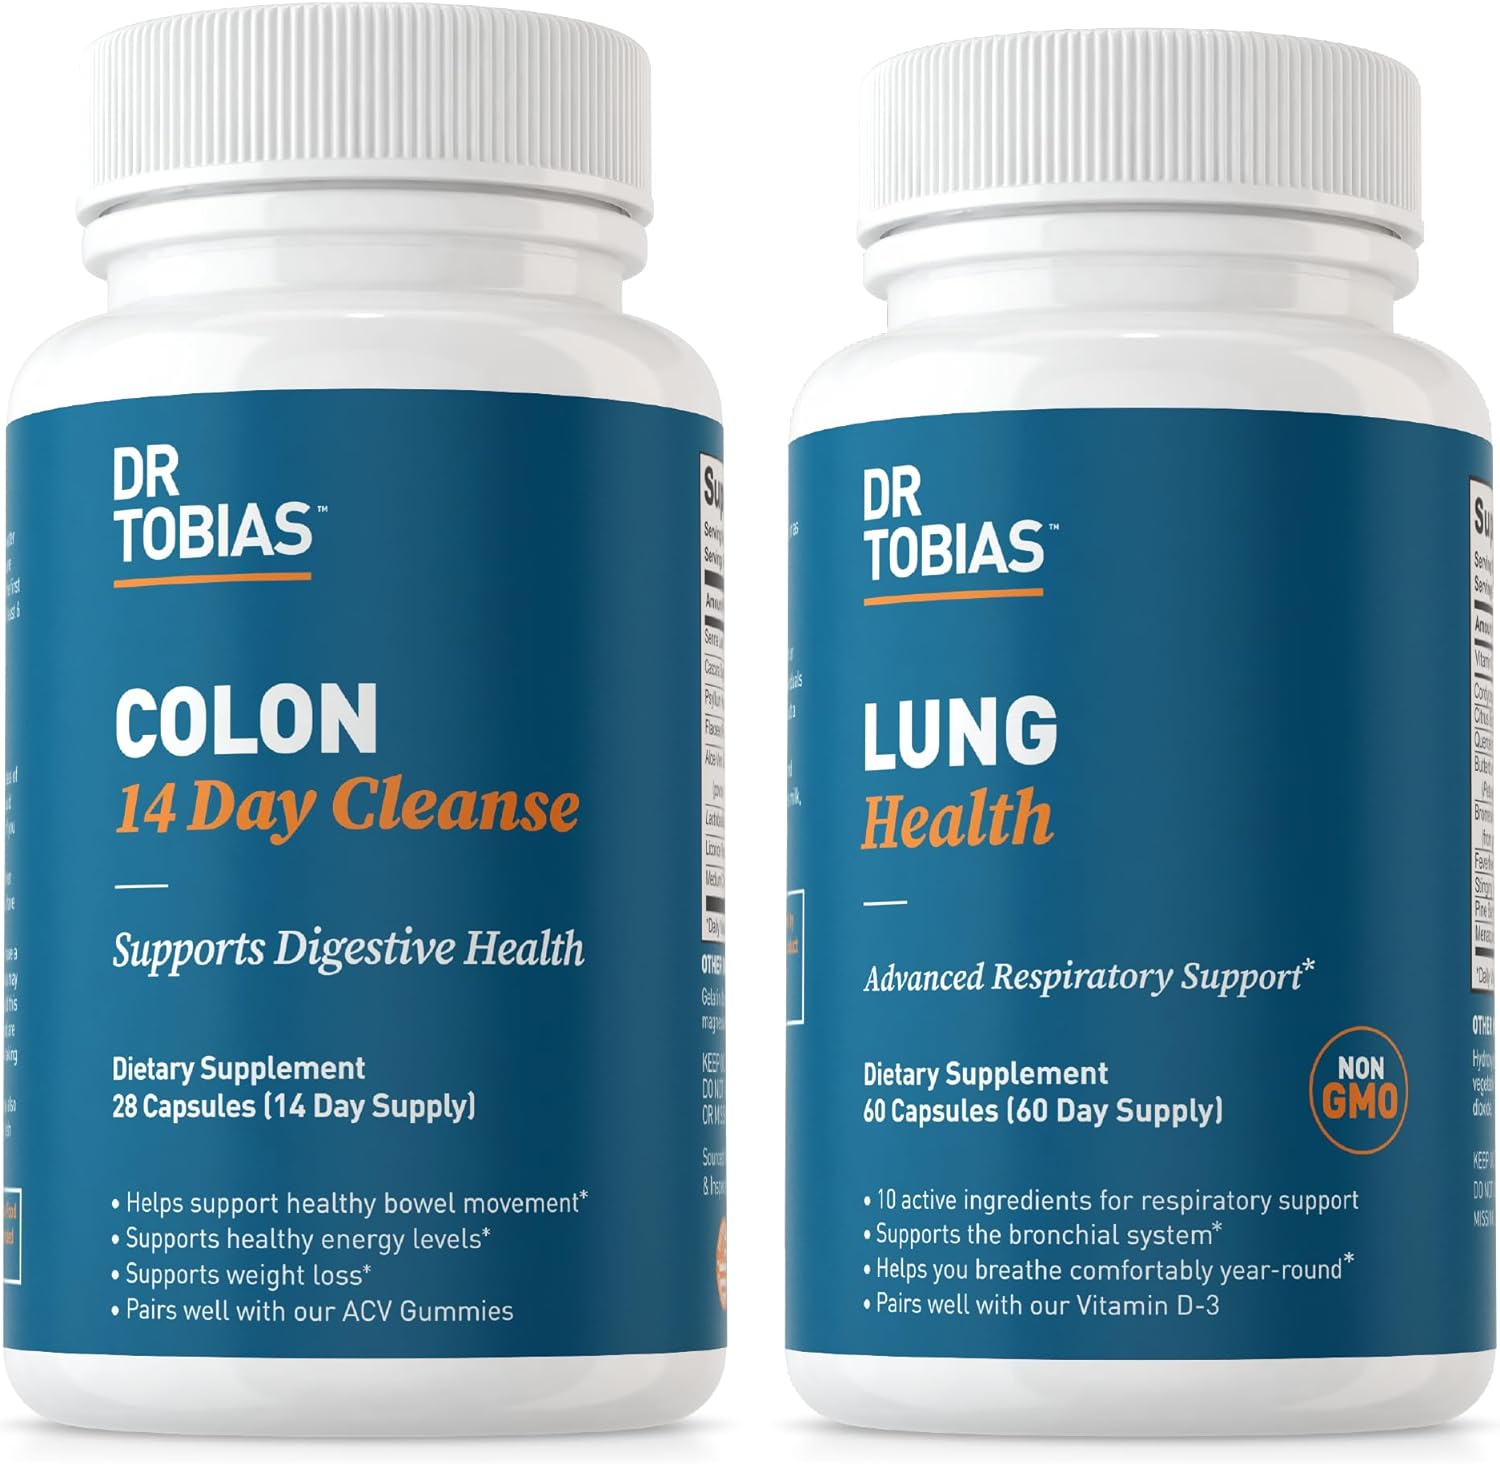 Dr. Tobias Colon 14 Day Cleanse and Lung Health Supplements, with Fiber, Herbs  Probiotics, Vitamin C, Butterbur, Quercetin  Bromelain, Gut and Lung Support, Non-GMO